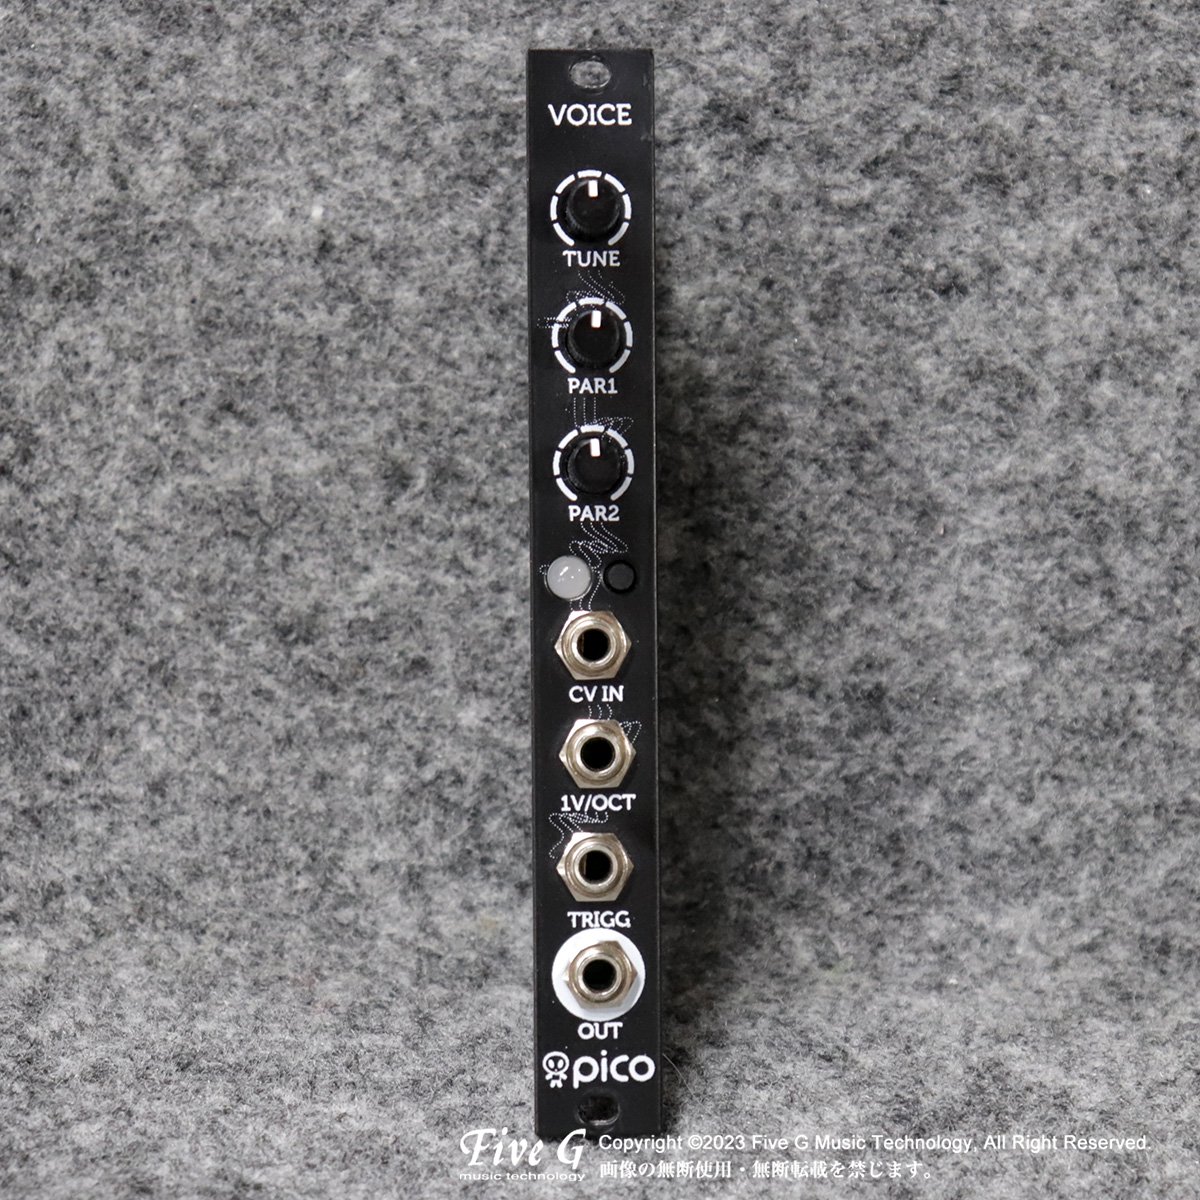 Used　中古　Pico　Voice　Synths　Five　technology　G　music　Erica　モジュラーシンセ